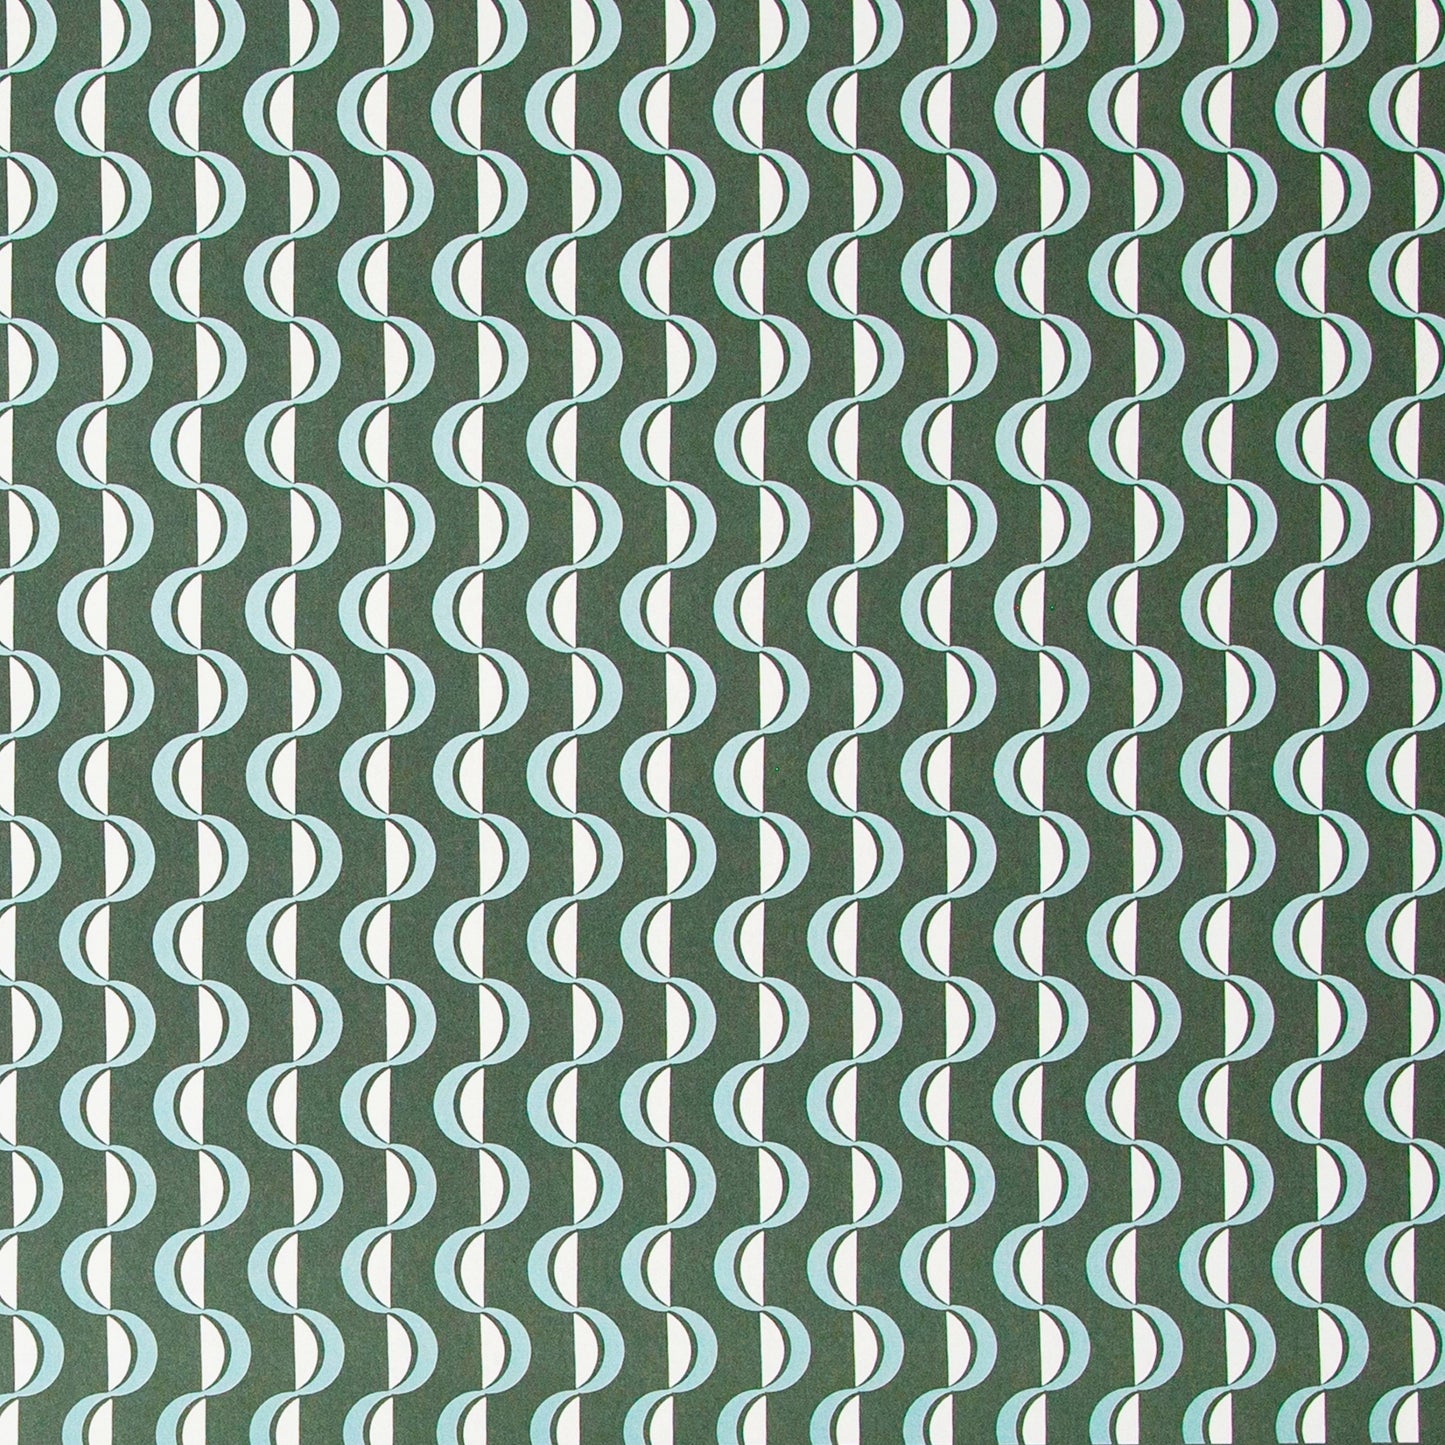 wavy striped geometric wrapping paper in forest green, aqua and white, by Ola Studio forest 